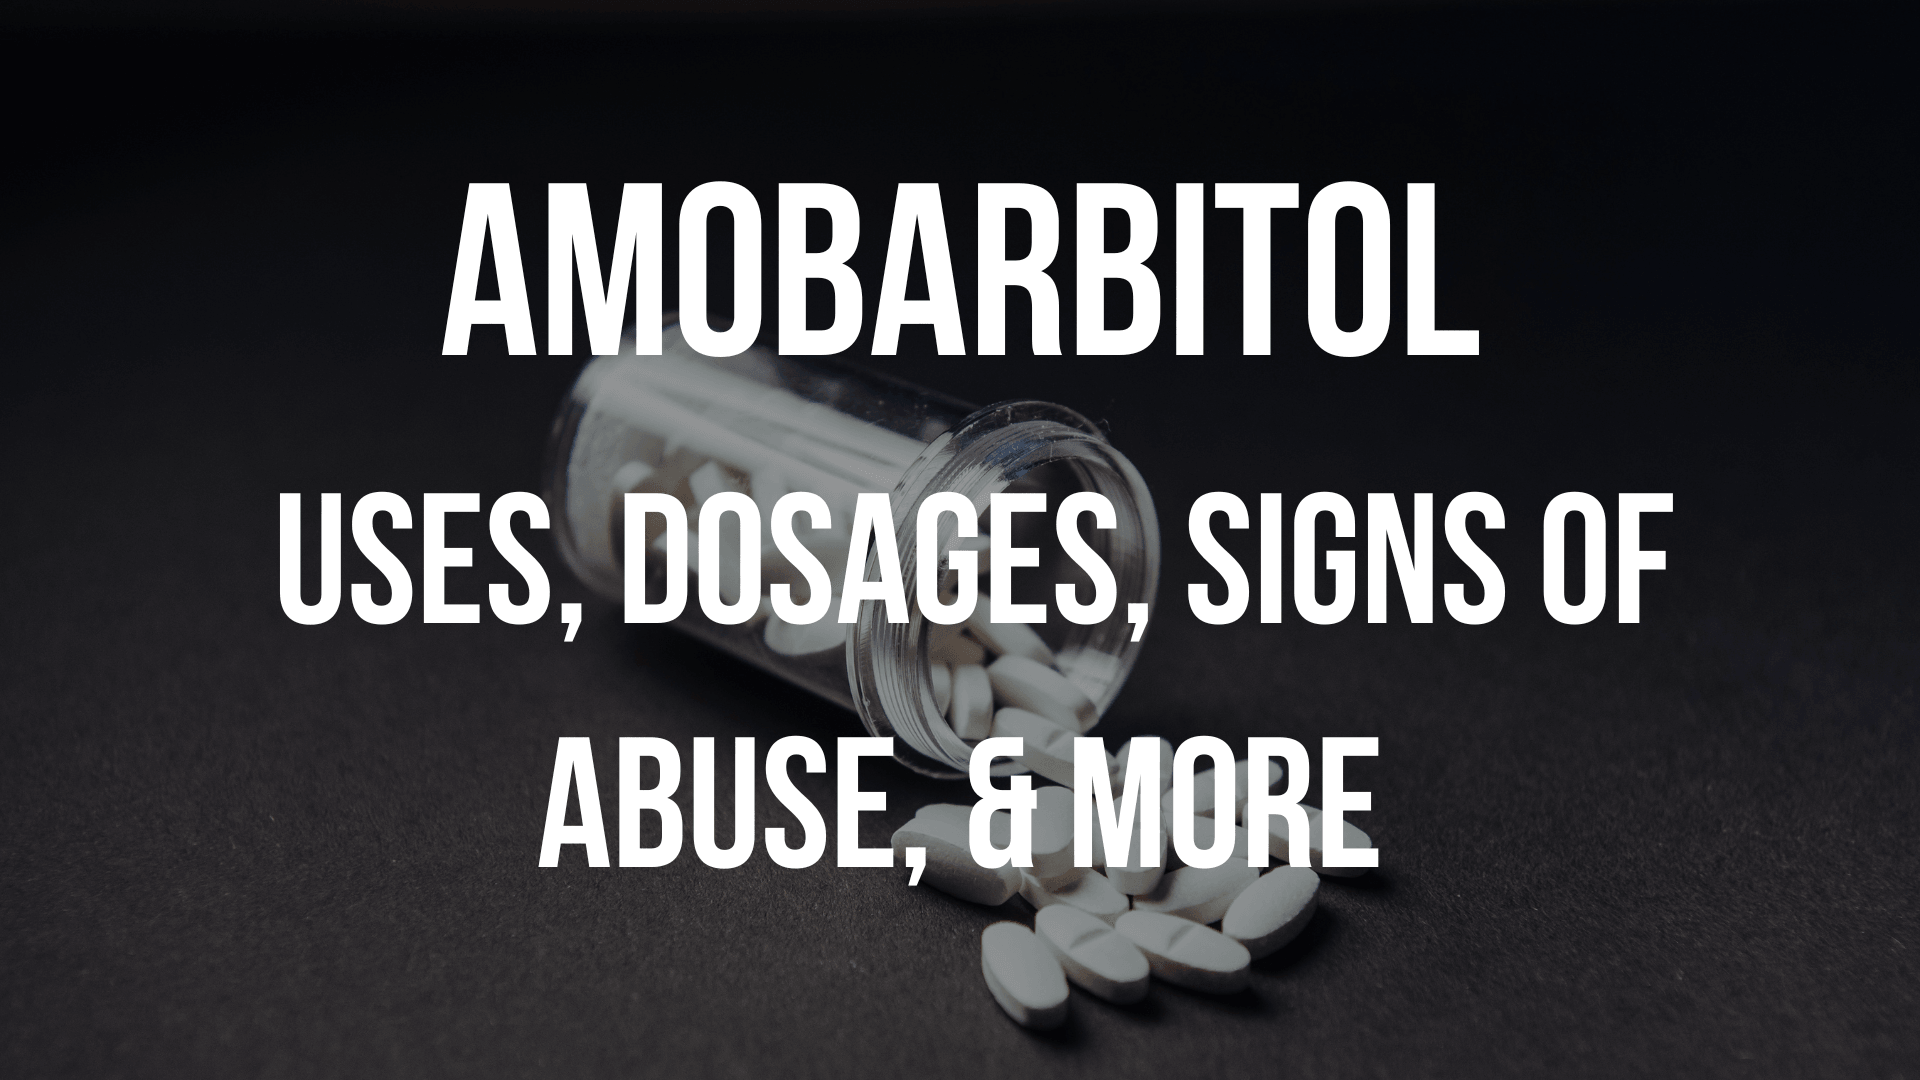 Understanding Amobarbital: Uses, Dosages, Signs of Abuse, & More